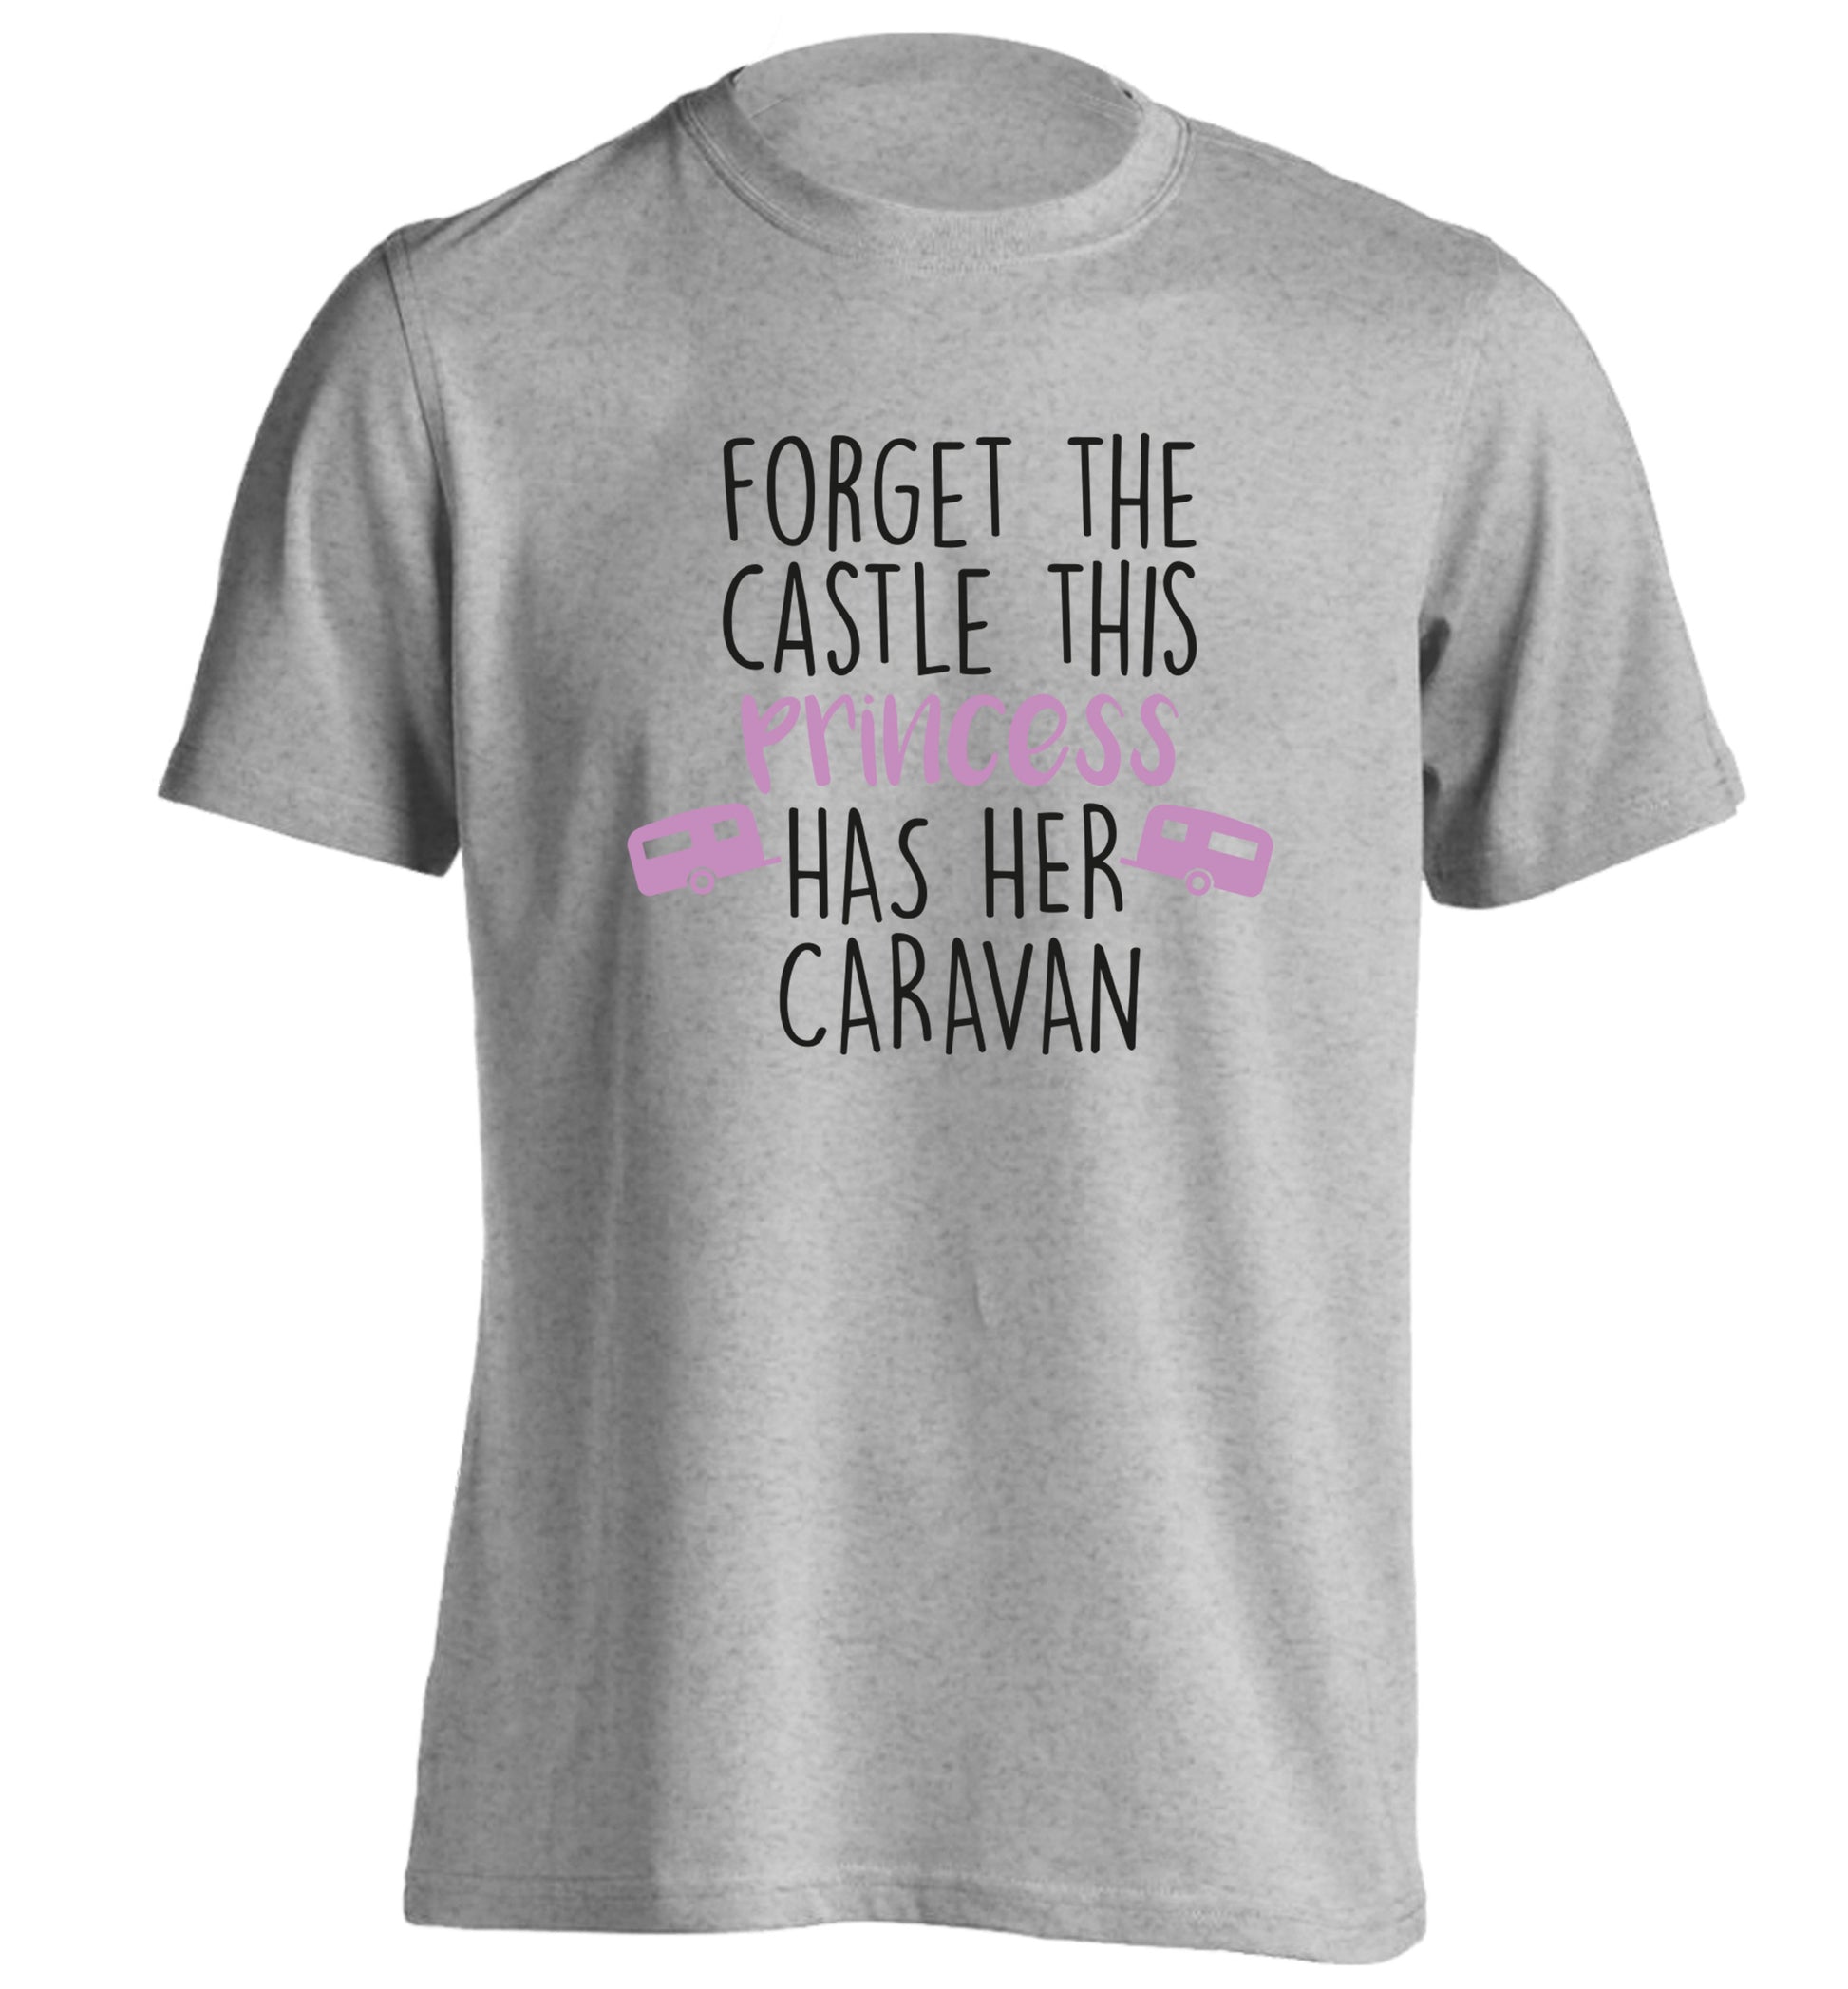 Forget the castle this princess lives at the caravan adults unisex grey Tshirt 2XL